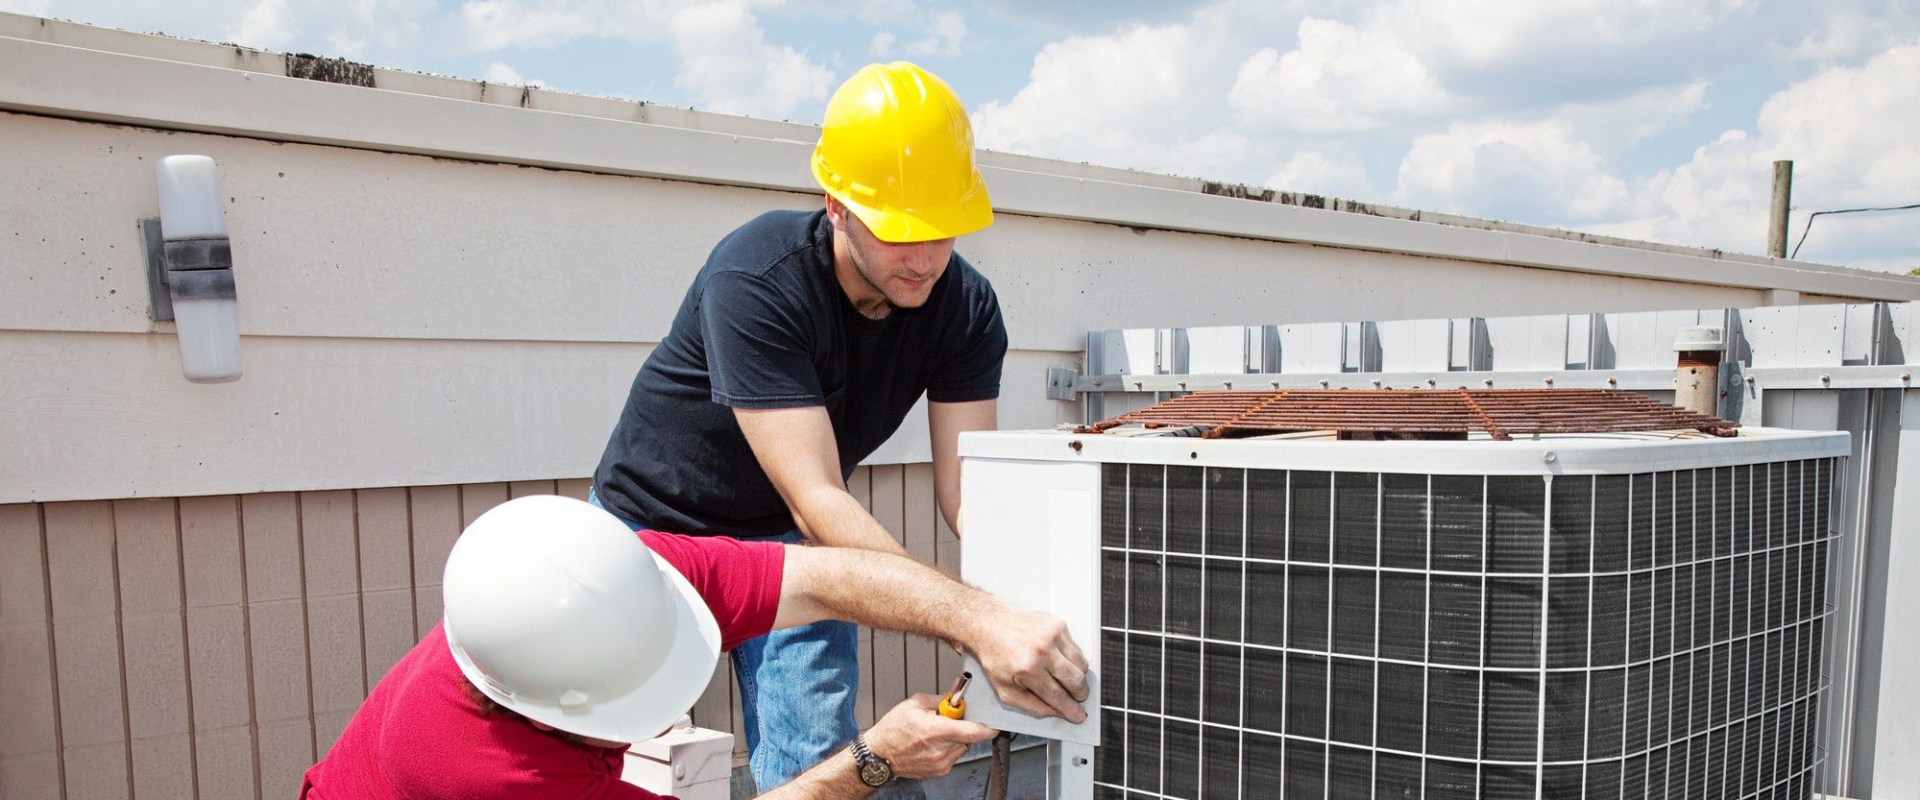 Why You Should Get Commercial HVAC Repair Before Doing Home Or Commercial Property Renovations In Louisiana